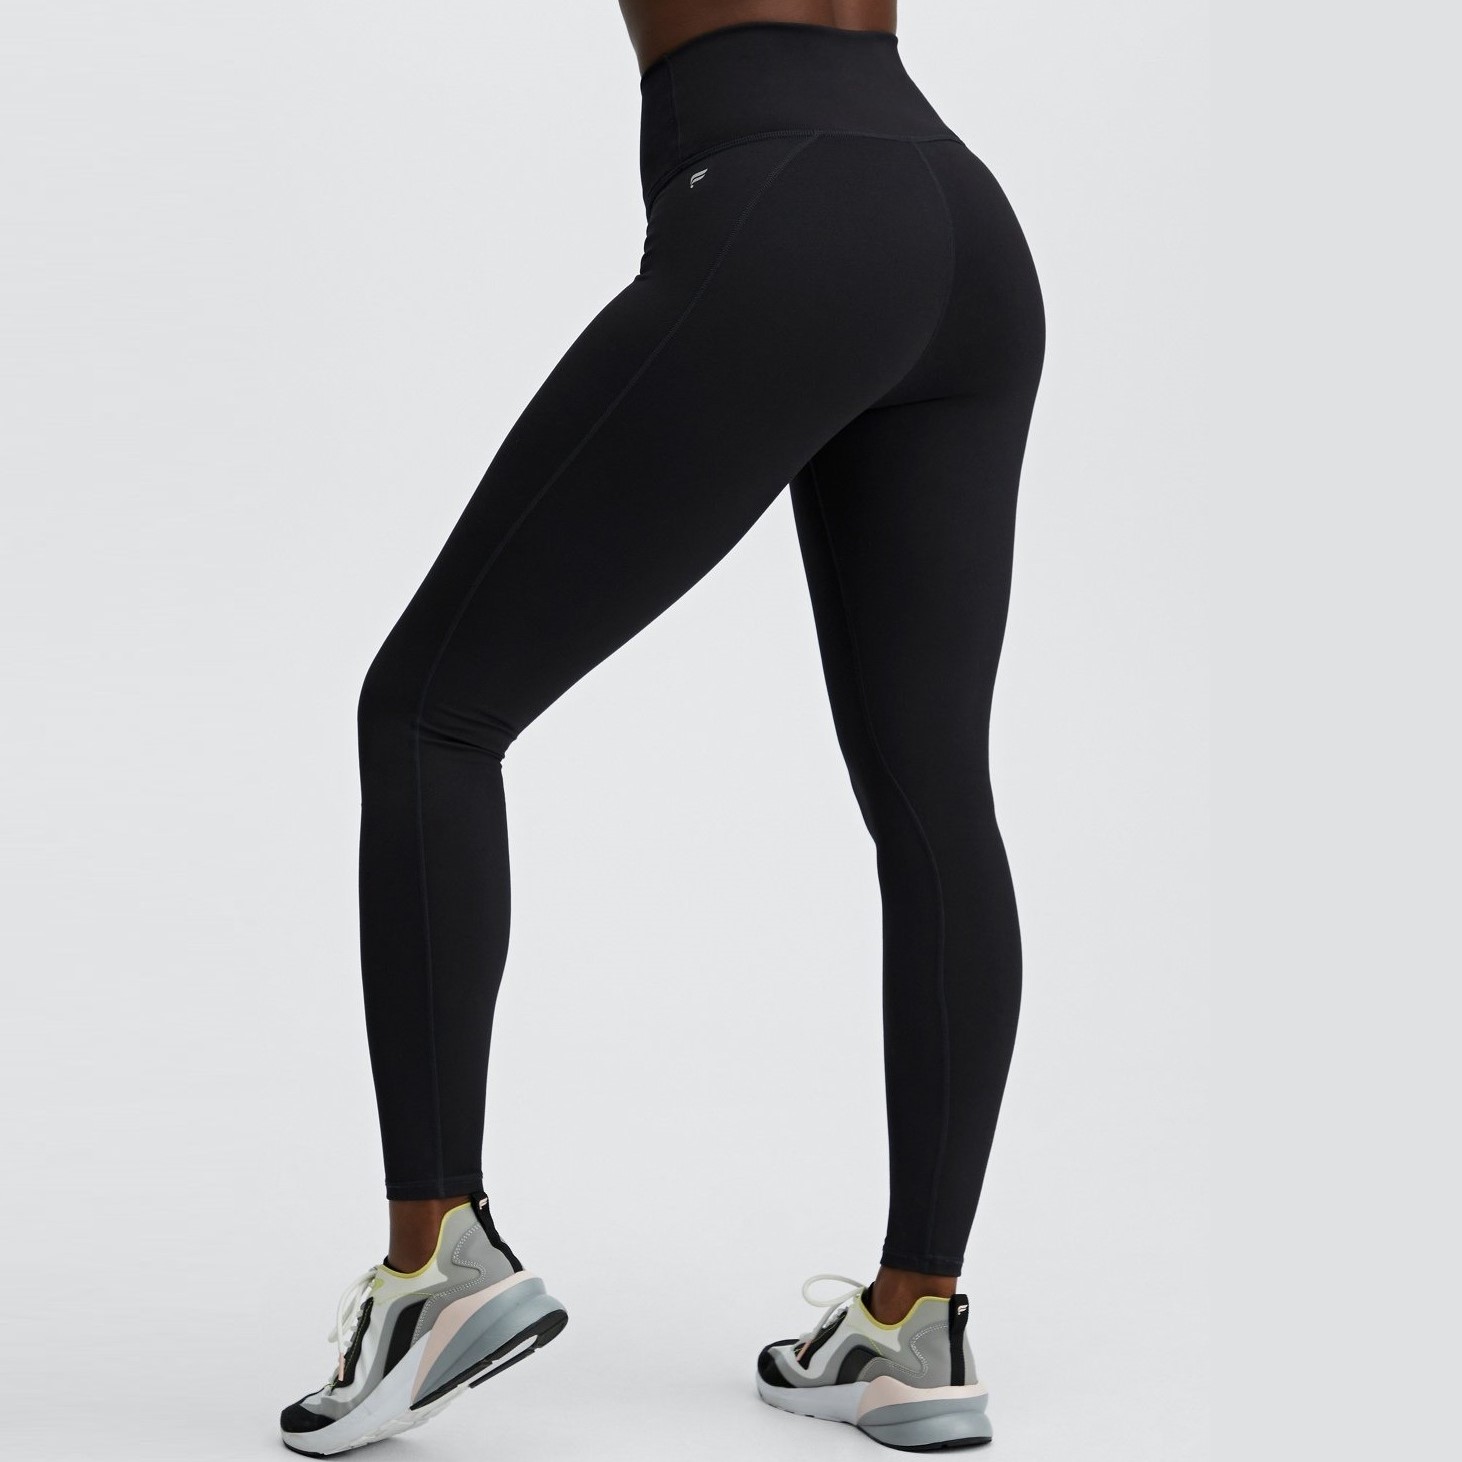 Fabletics vs Lululemon Review - Must Read This Before Buying